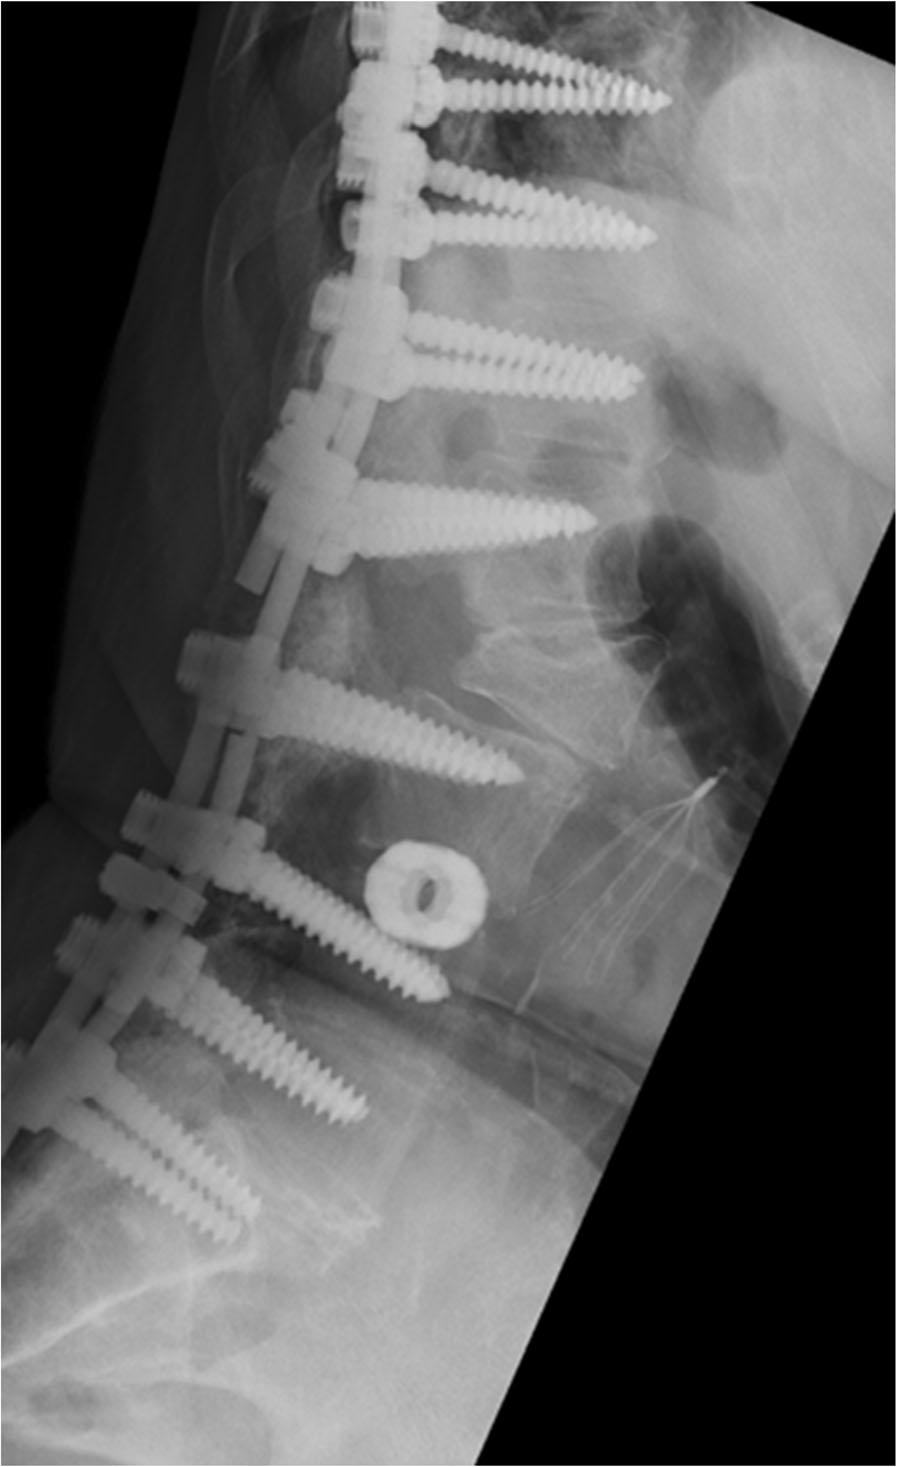 All patients who demonstrated implant failure at the level of osteotomy were between 6 and 12 months post surgery. Symptomatic rod failure occurred at 24 months in a patient with L5 S1 failure.